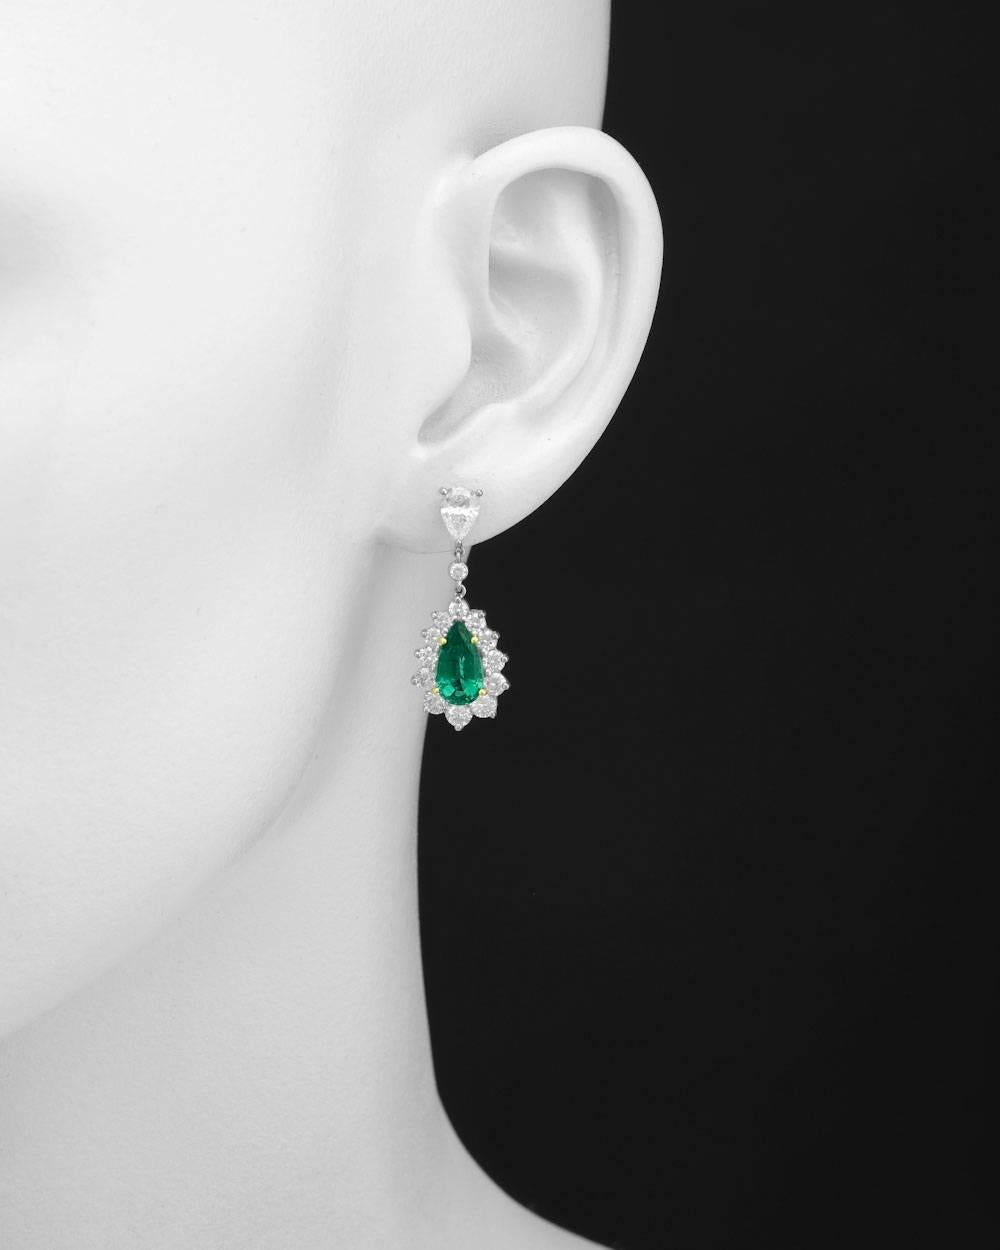 Emerald and diamond pendant earrings, showcasing a pair of pear-shaped emeralds weighing approximately 2.80 total carats, accented by a circular-cut diamond surround and suspended from a bezel-set circular-cut diamond to a pear-shaped diamond